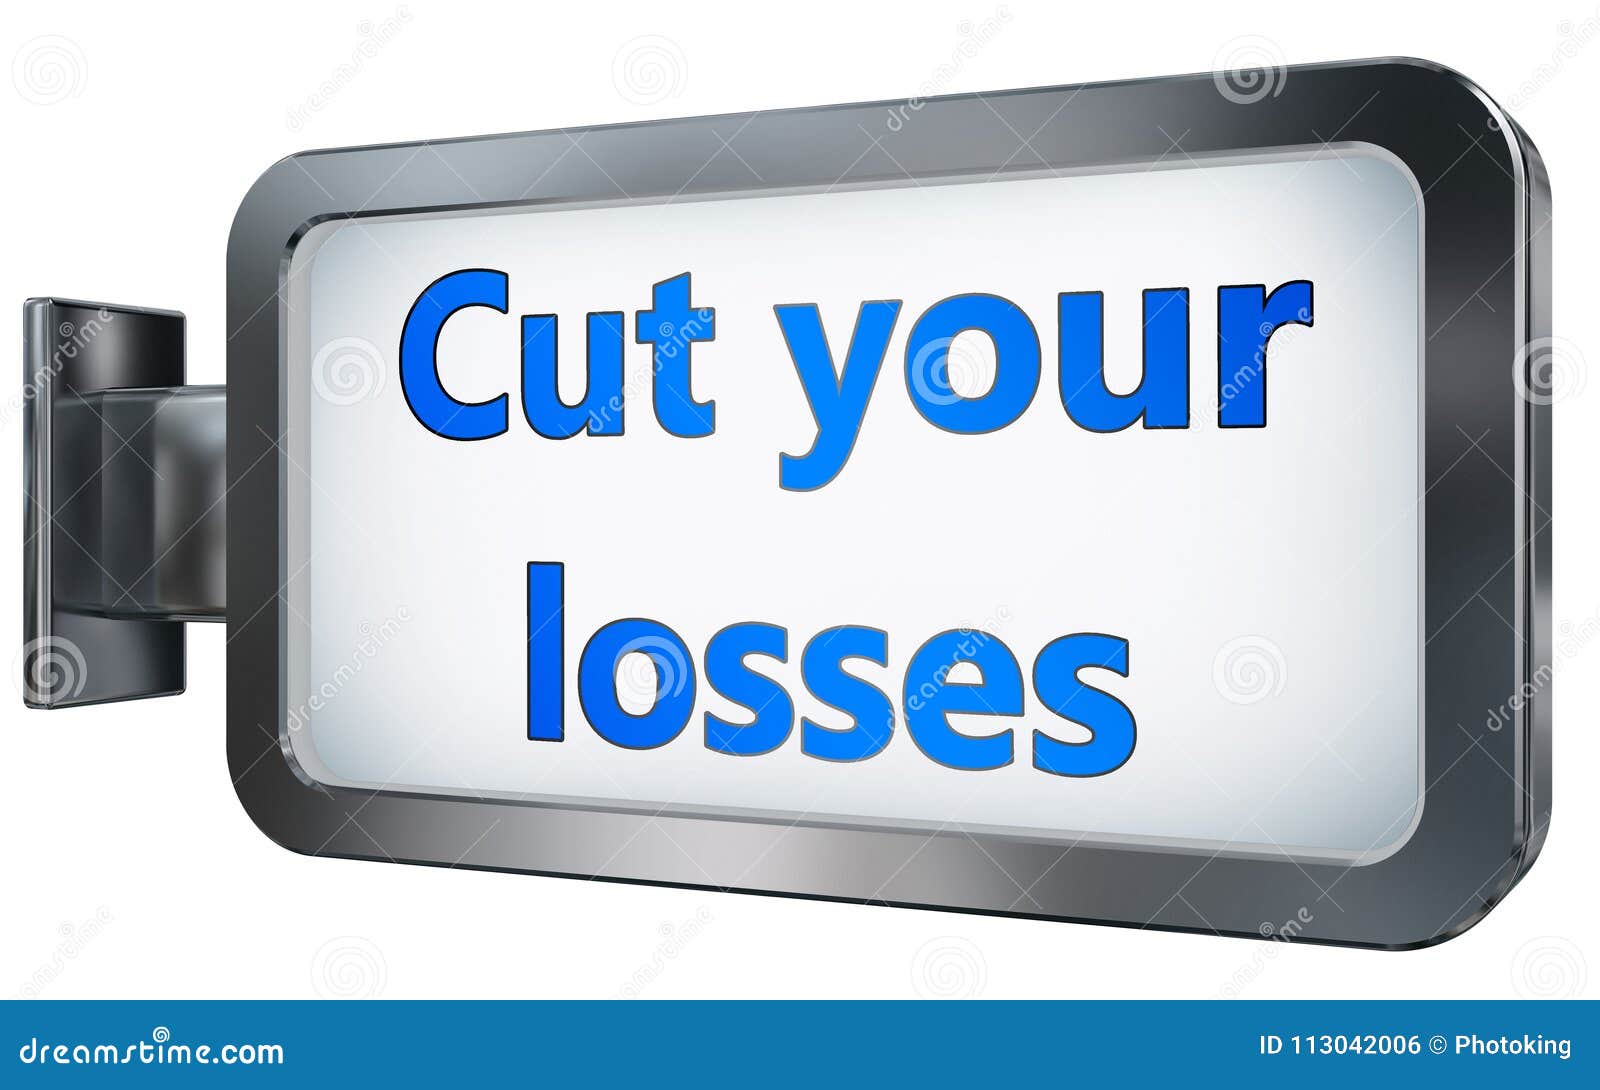 cut your losses on billboard background